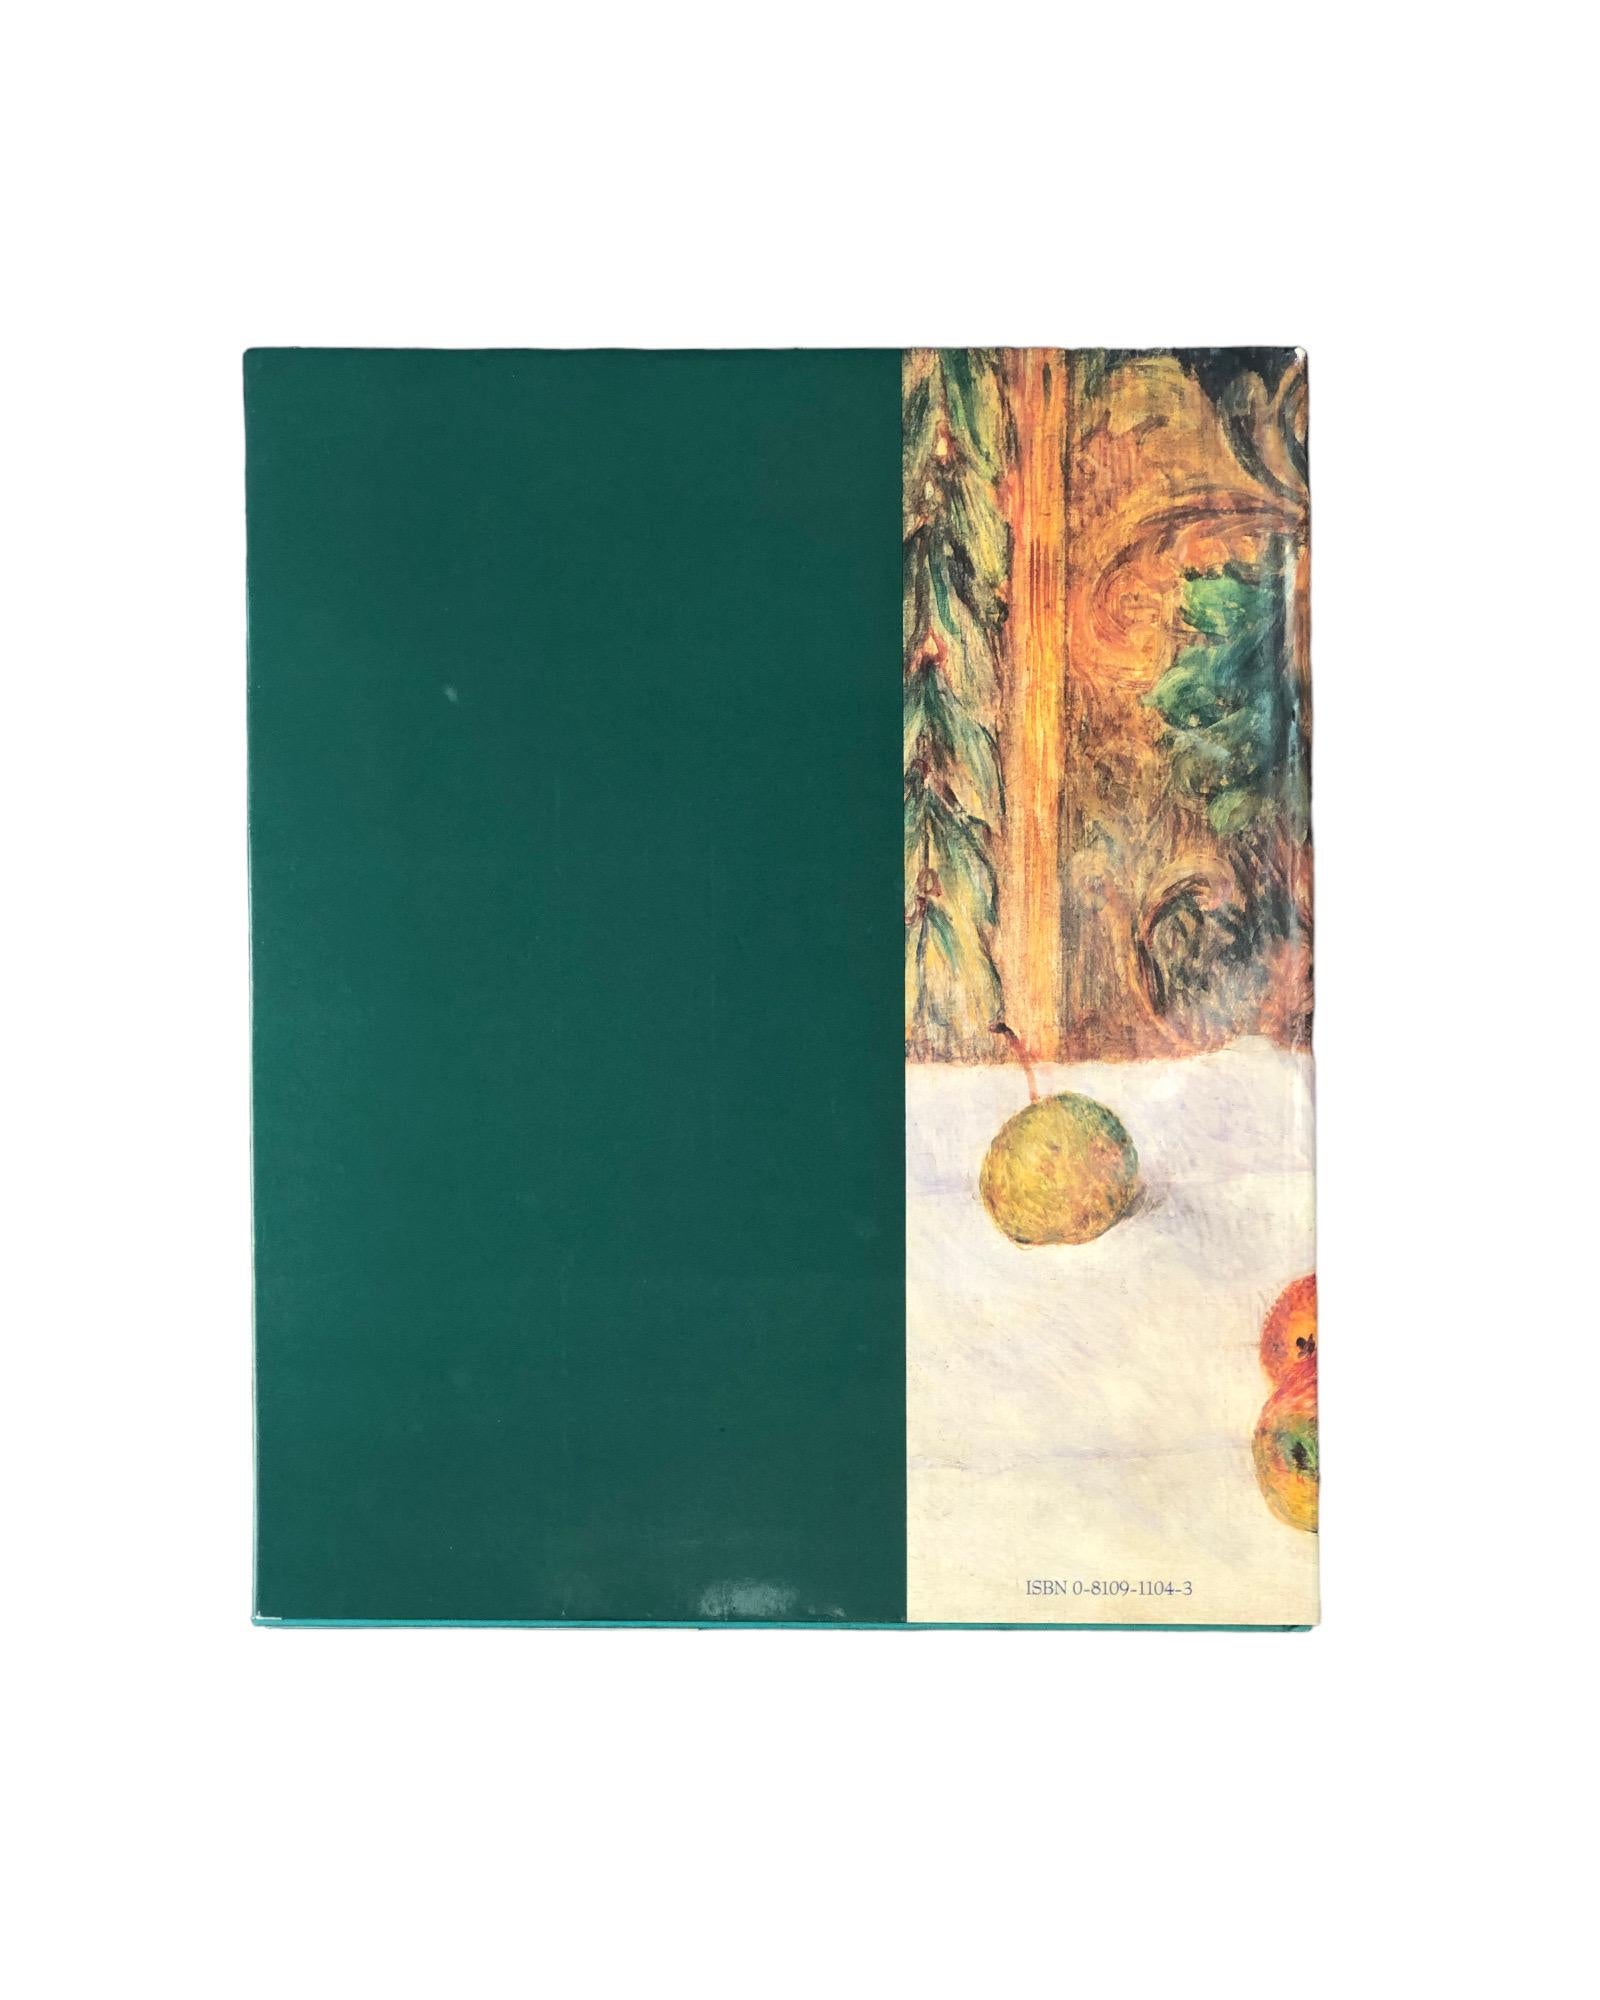 Impressionist and Post-Impressionist Paintings in the Metropolitan Museum of Art by Charles S. Moffett. Hardcover book with dustjacket. Published in 1985 by The Metropolitan Museum of Art and Harry N. Abrams. Printed and bound in Switzerland. 172